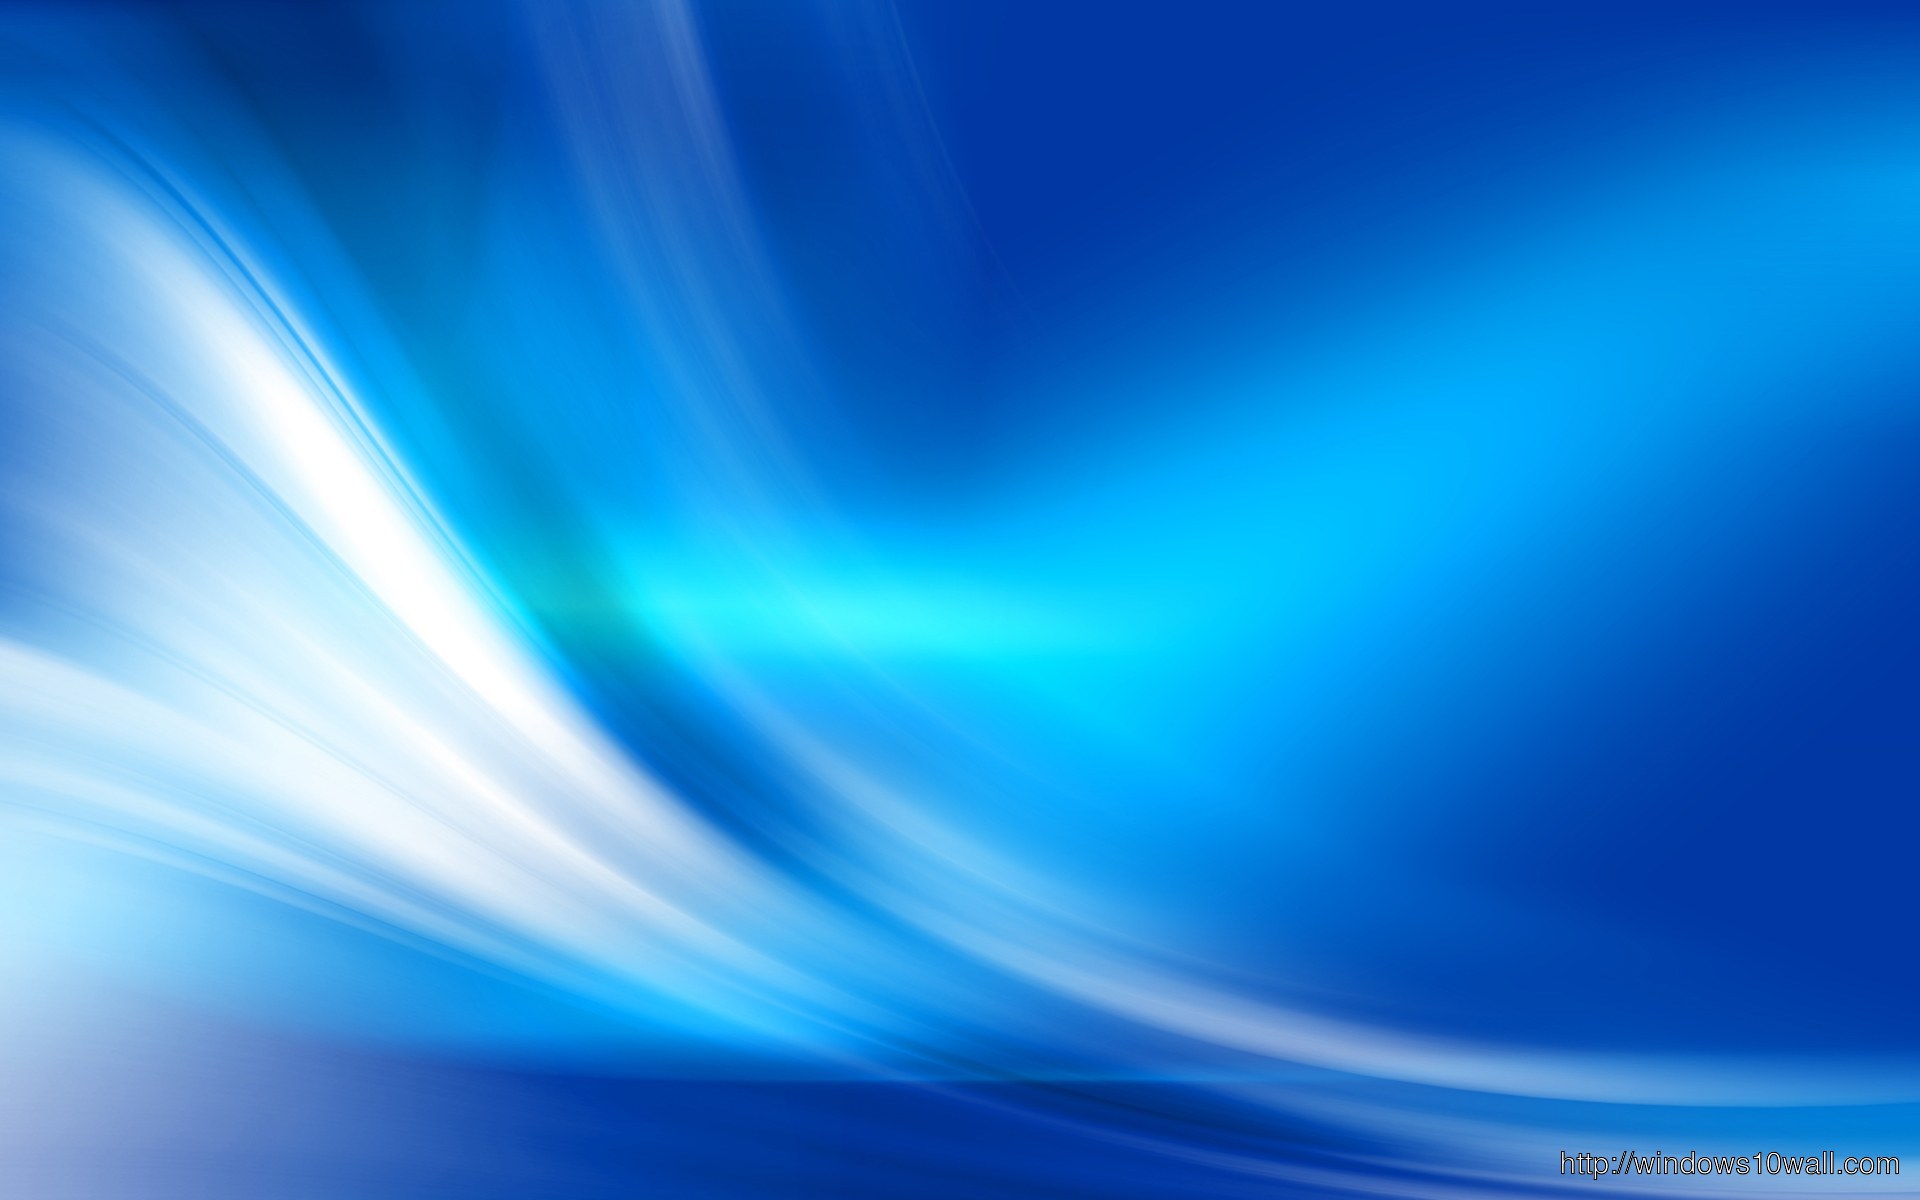 corporate blue background free download